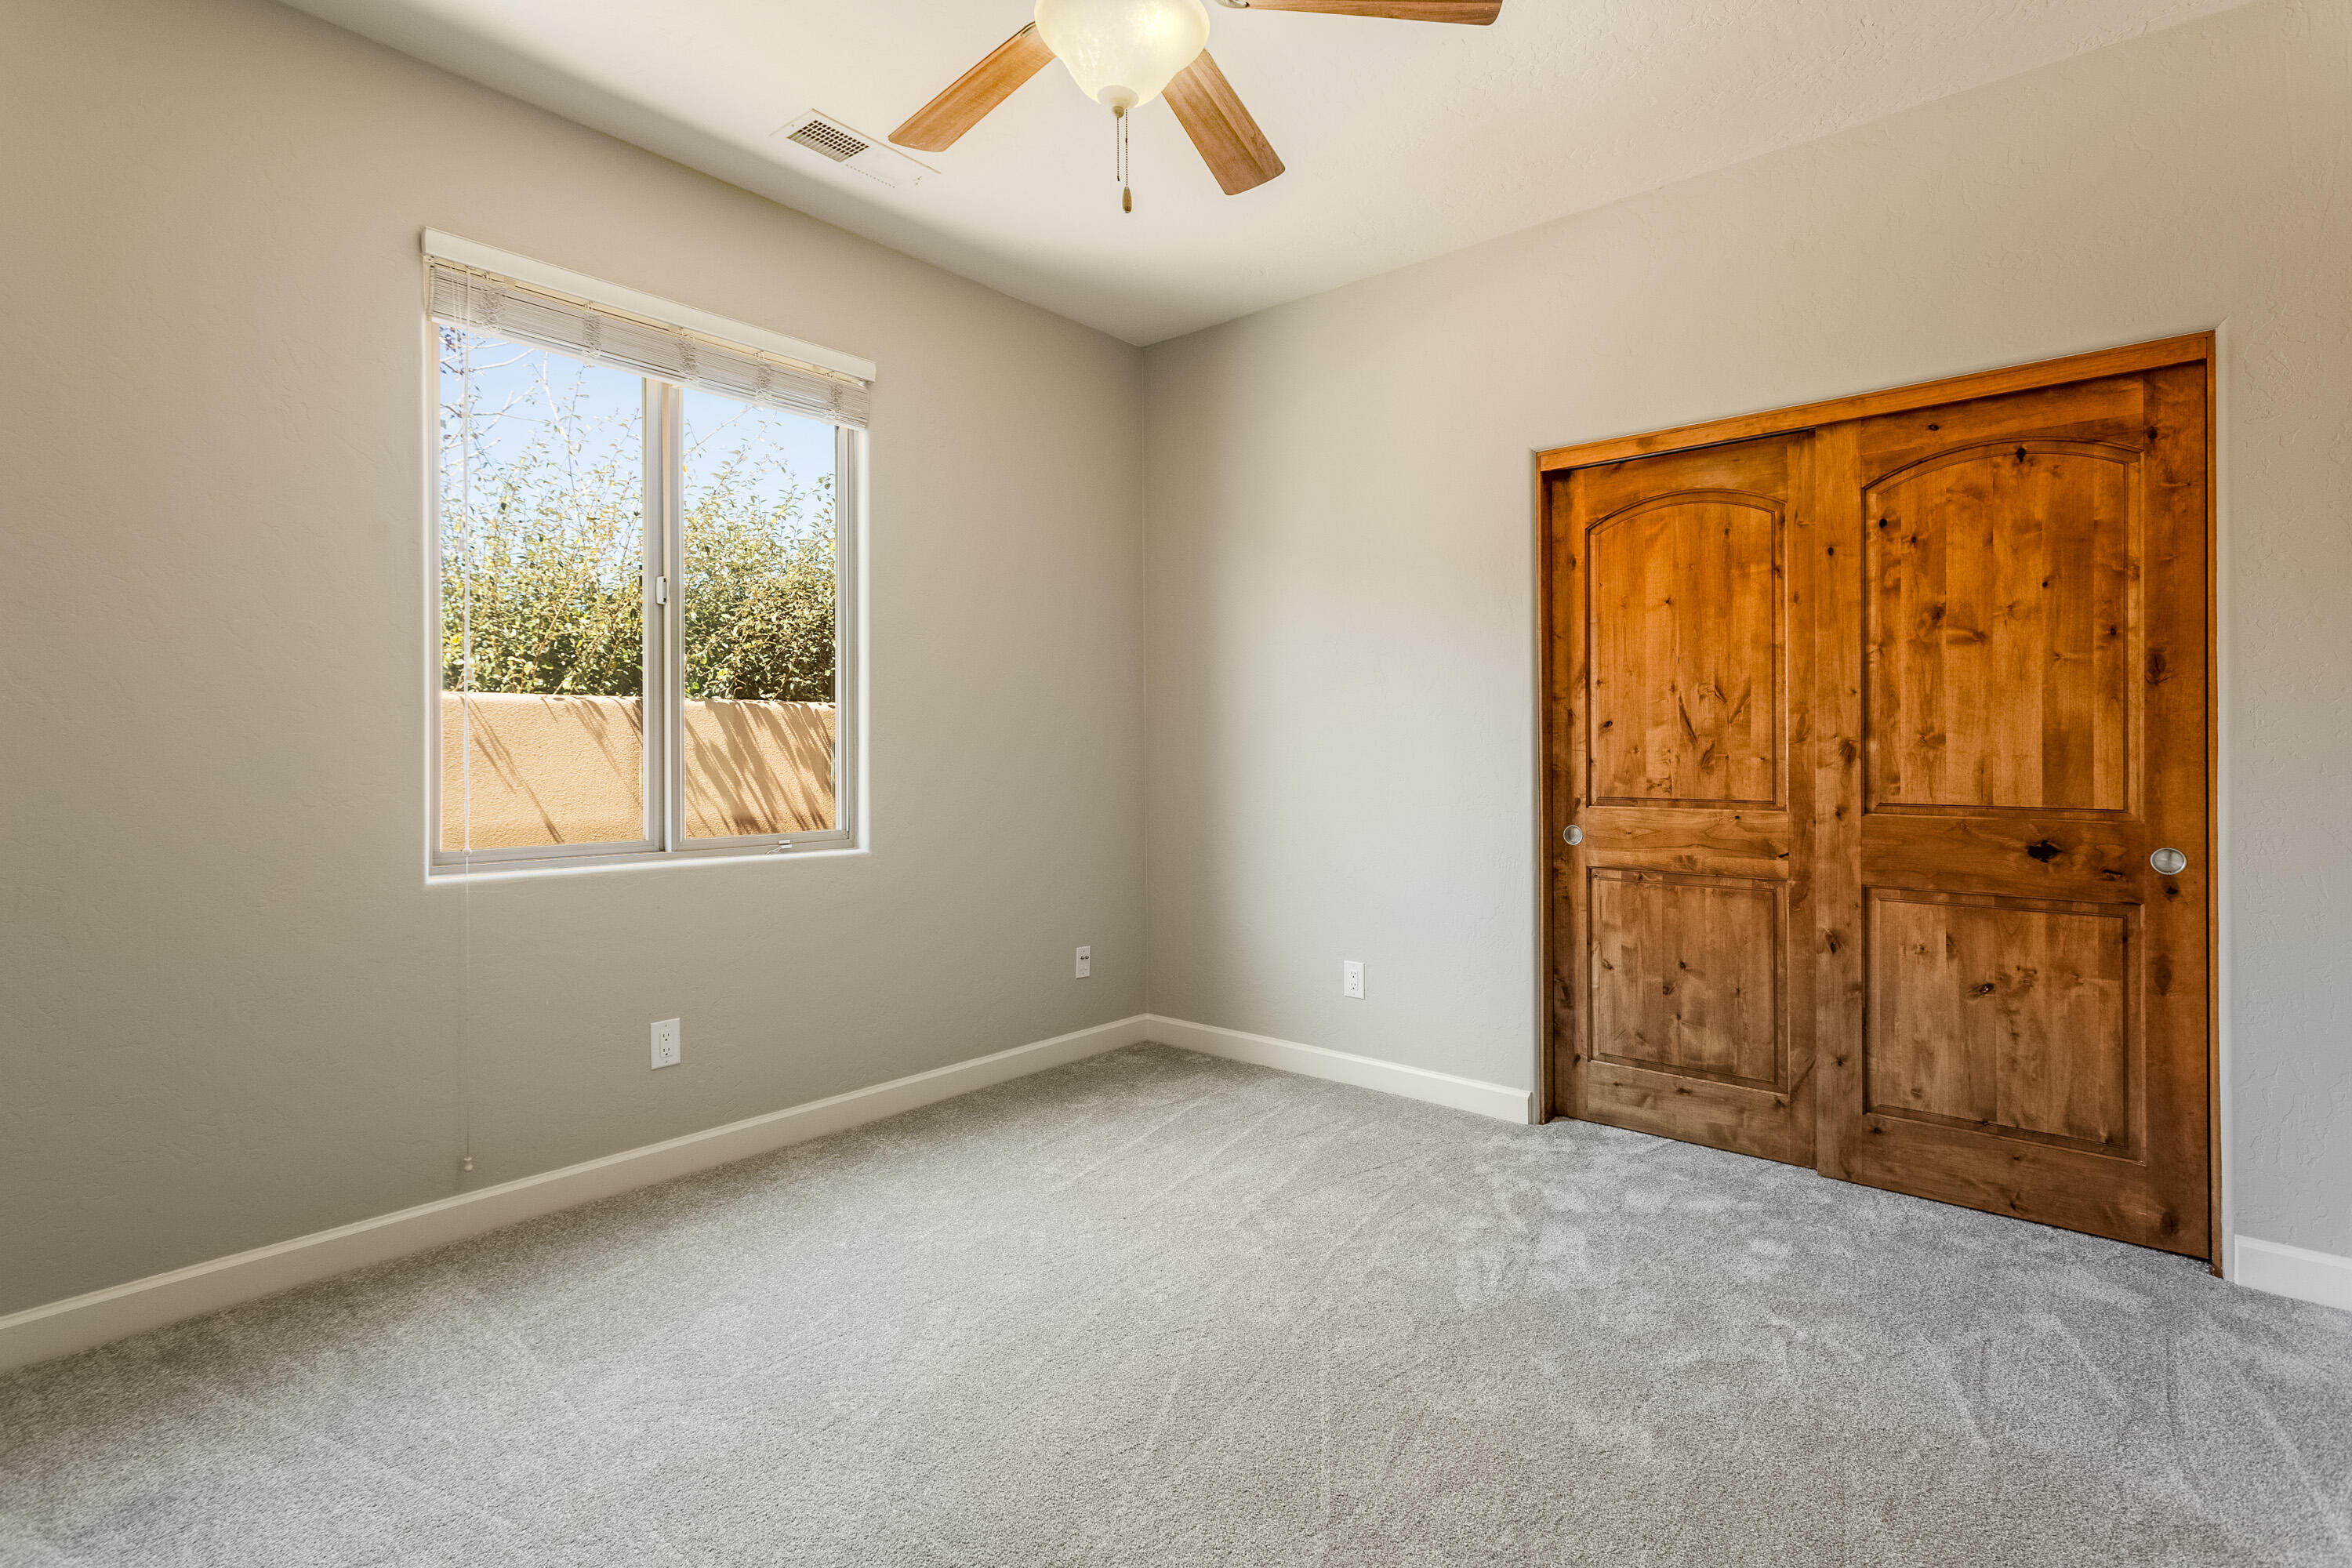 4901 Valle Rio Trail NW, Albuquerque, New Mexico 87120, 4 Bedrooms Bedrooms, ,3 BathroomsBathrooms,Residential,For Sale,4901 Valle Rio Trail NW,1061569